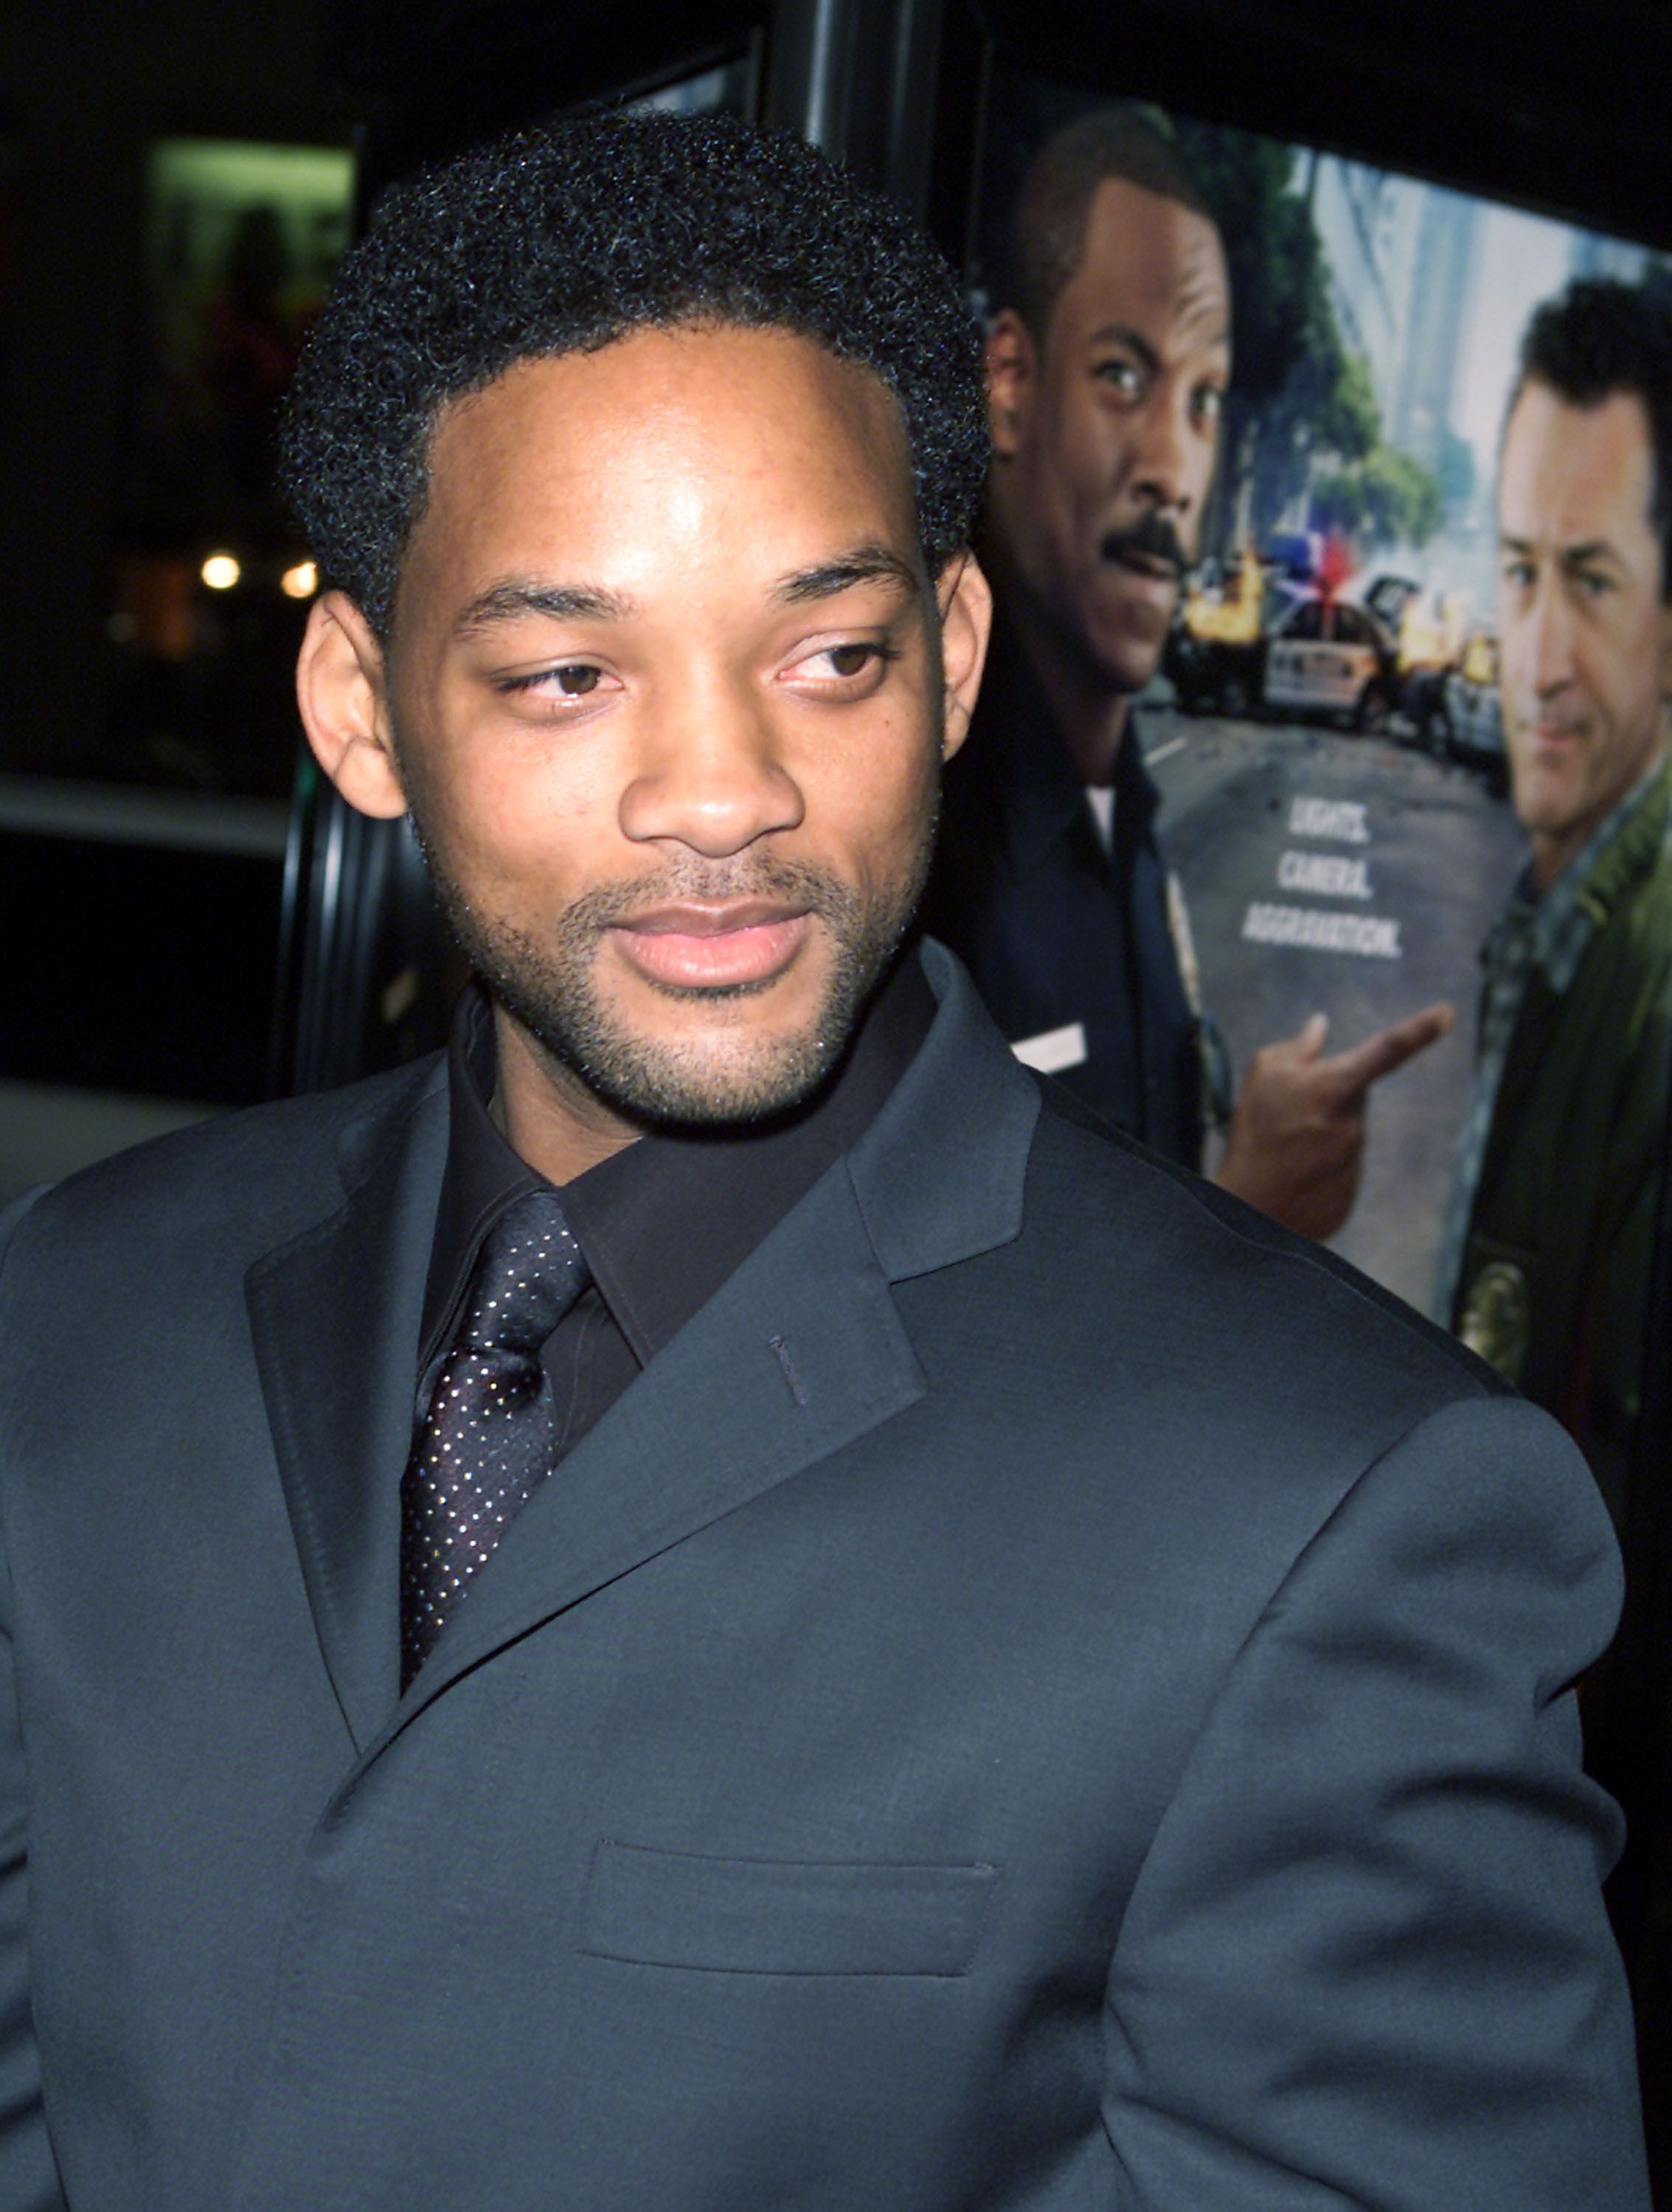 Will Smith attending a premiere in Los Angeles on Monday, March 11, 2002. | Photo: Getty Images